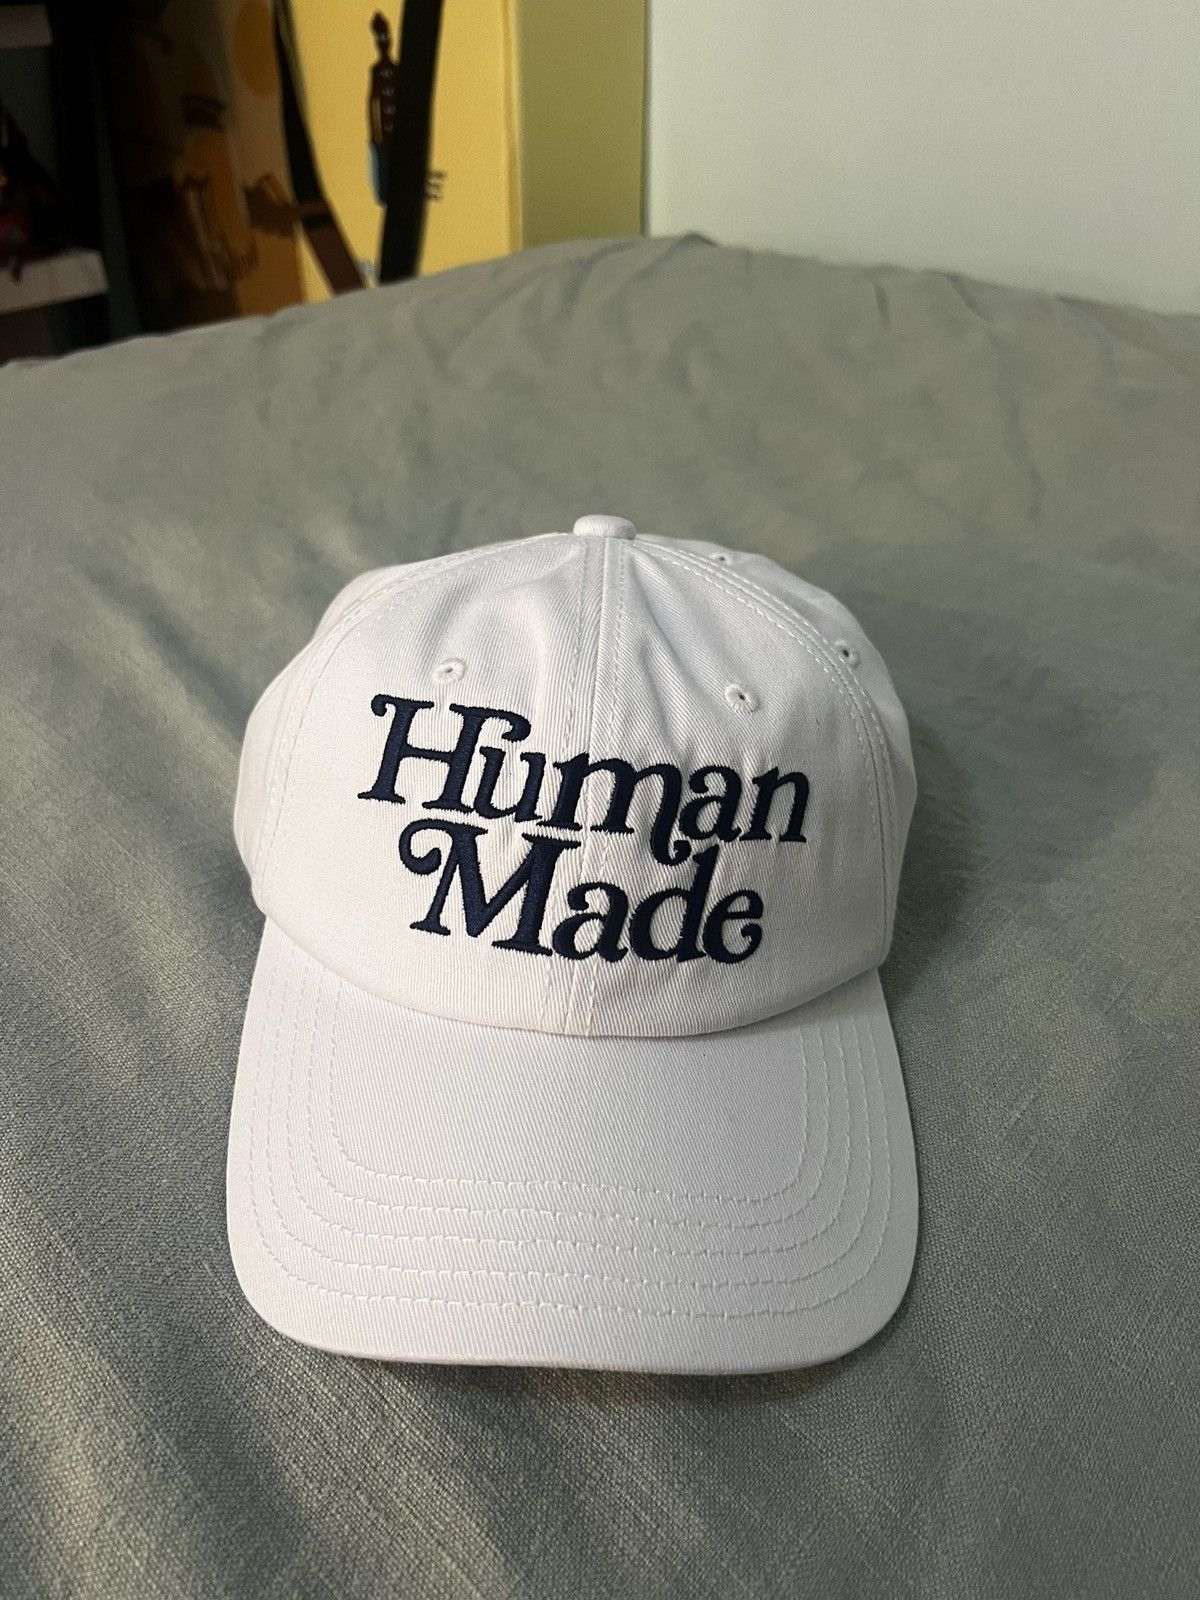 Human Made Girls Don't Cry x Human Made 6-Panel Hat | Grailed